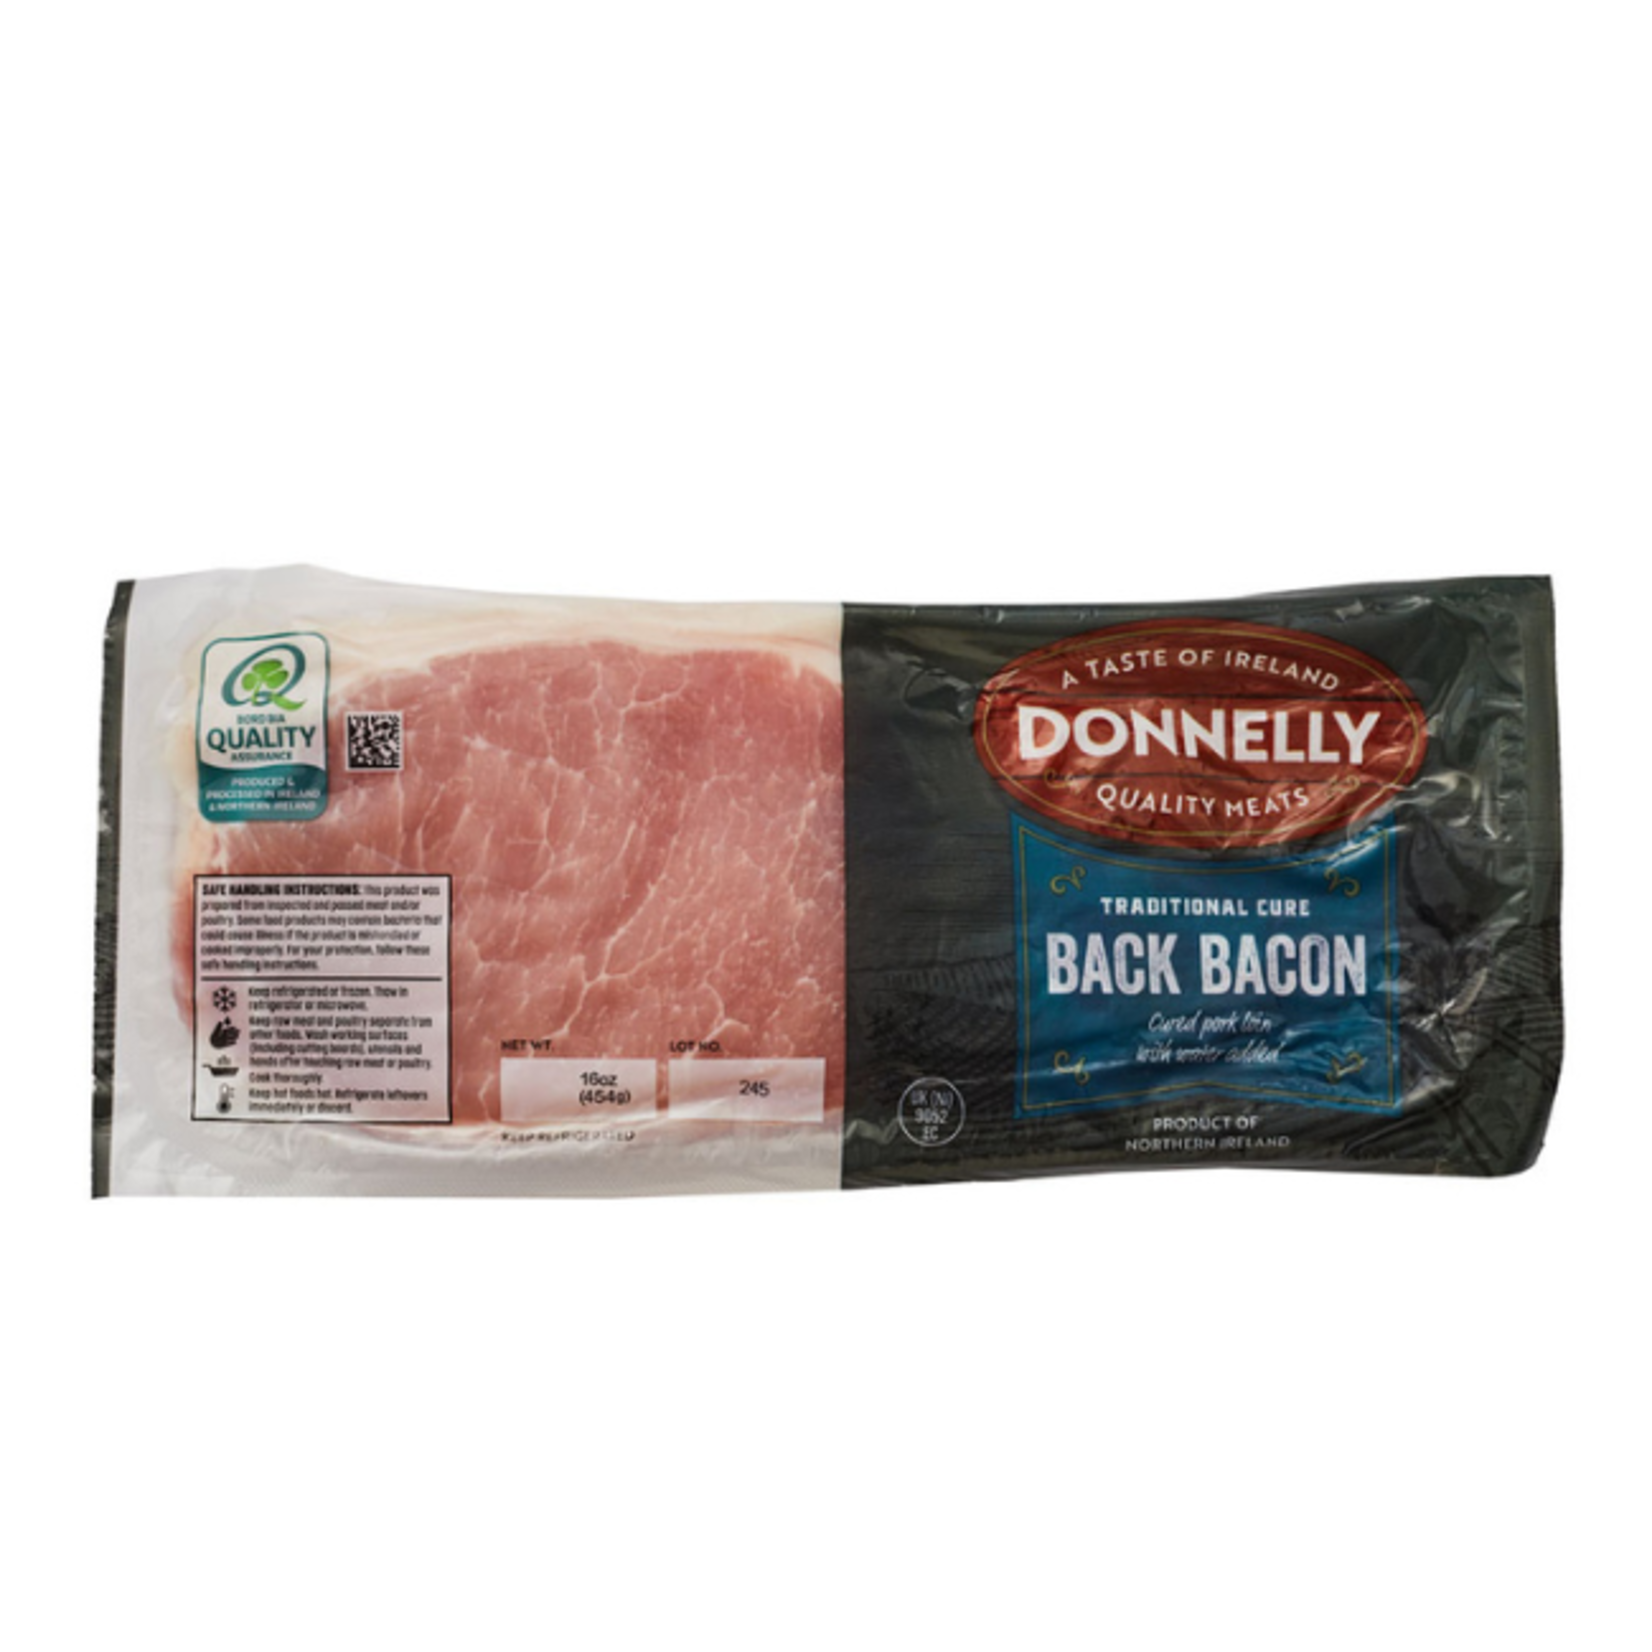 Donnelly Donnelly Irish Back Bacon 454g (16oz)